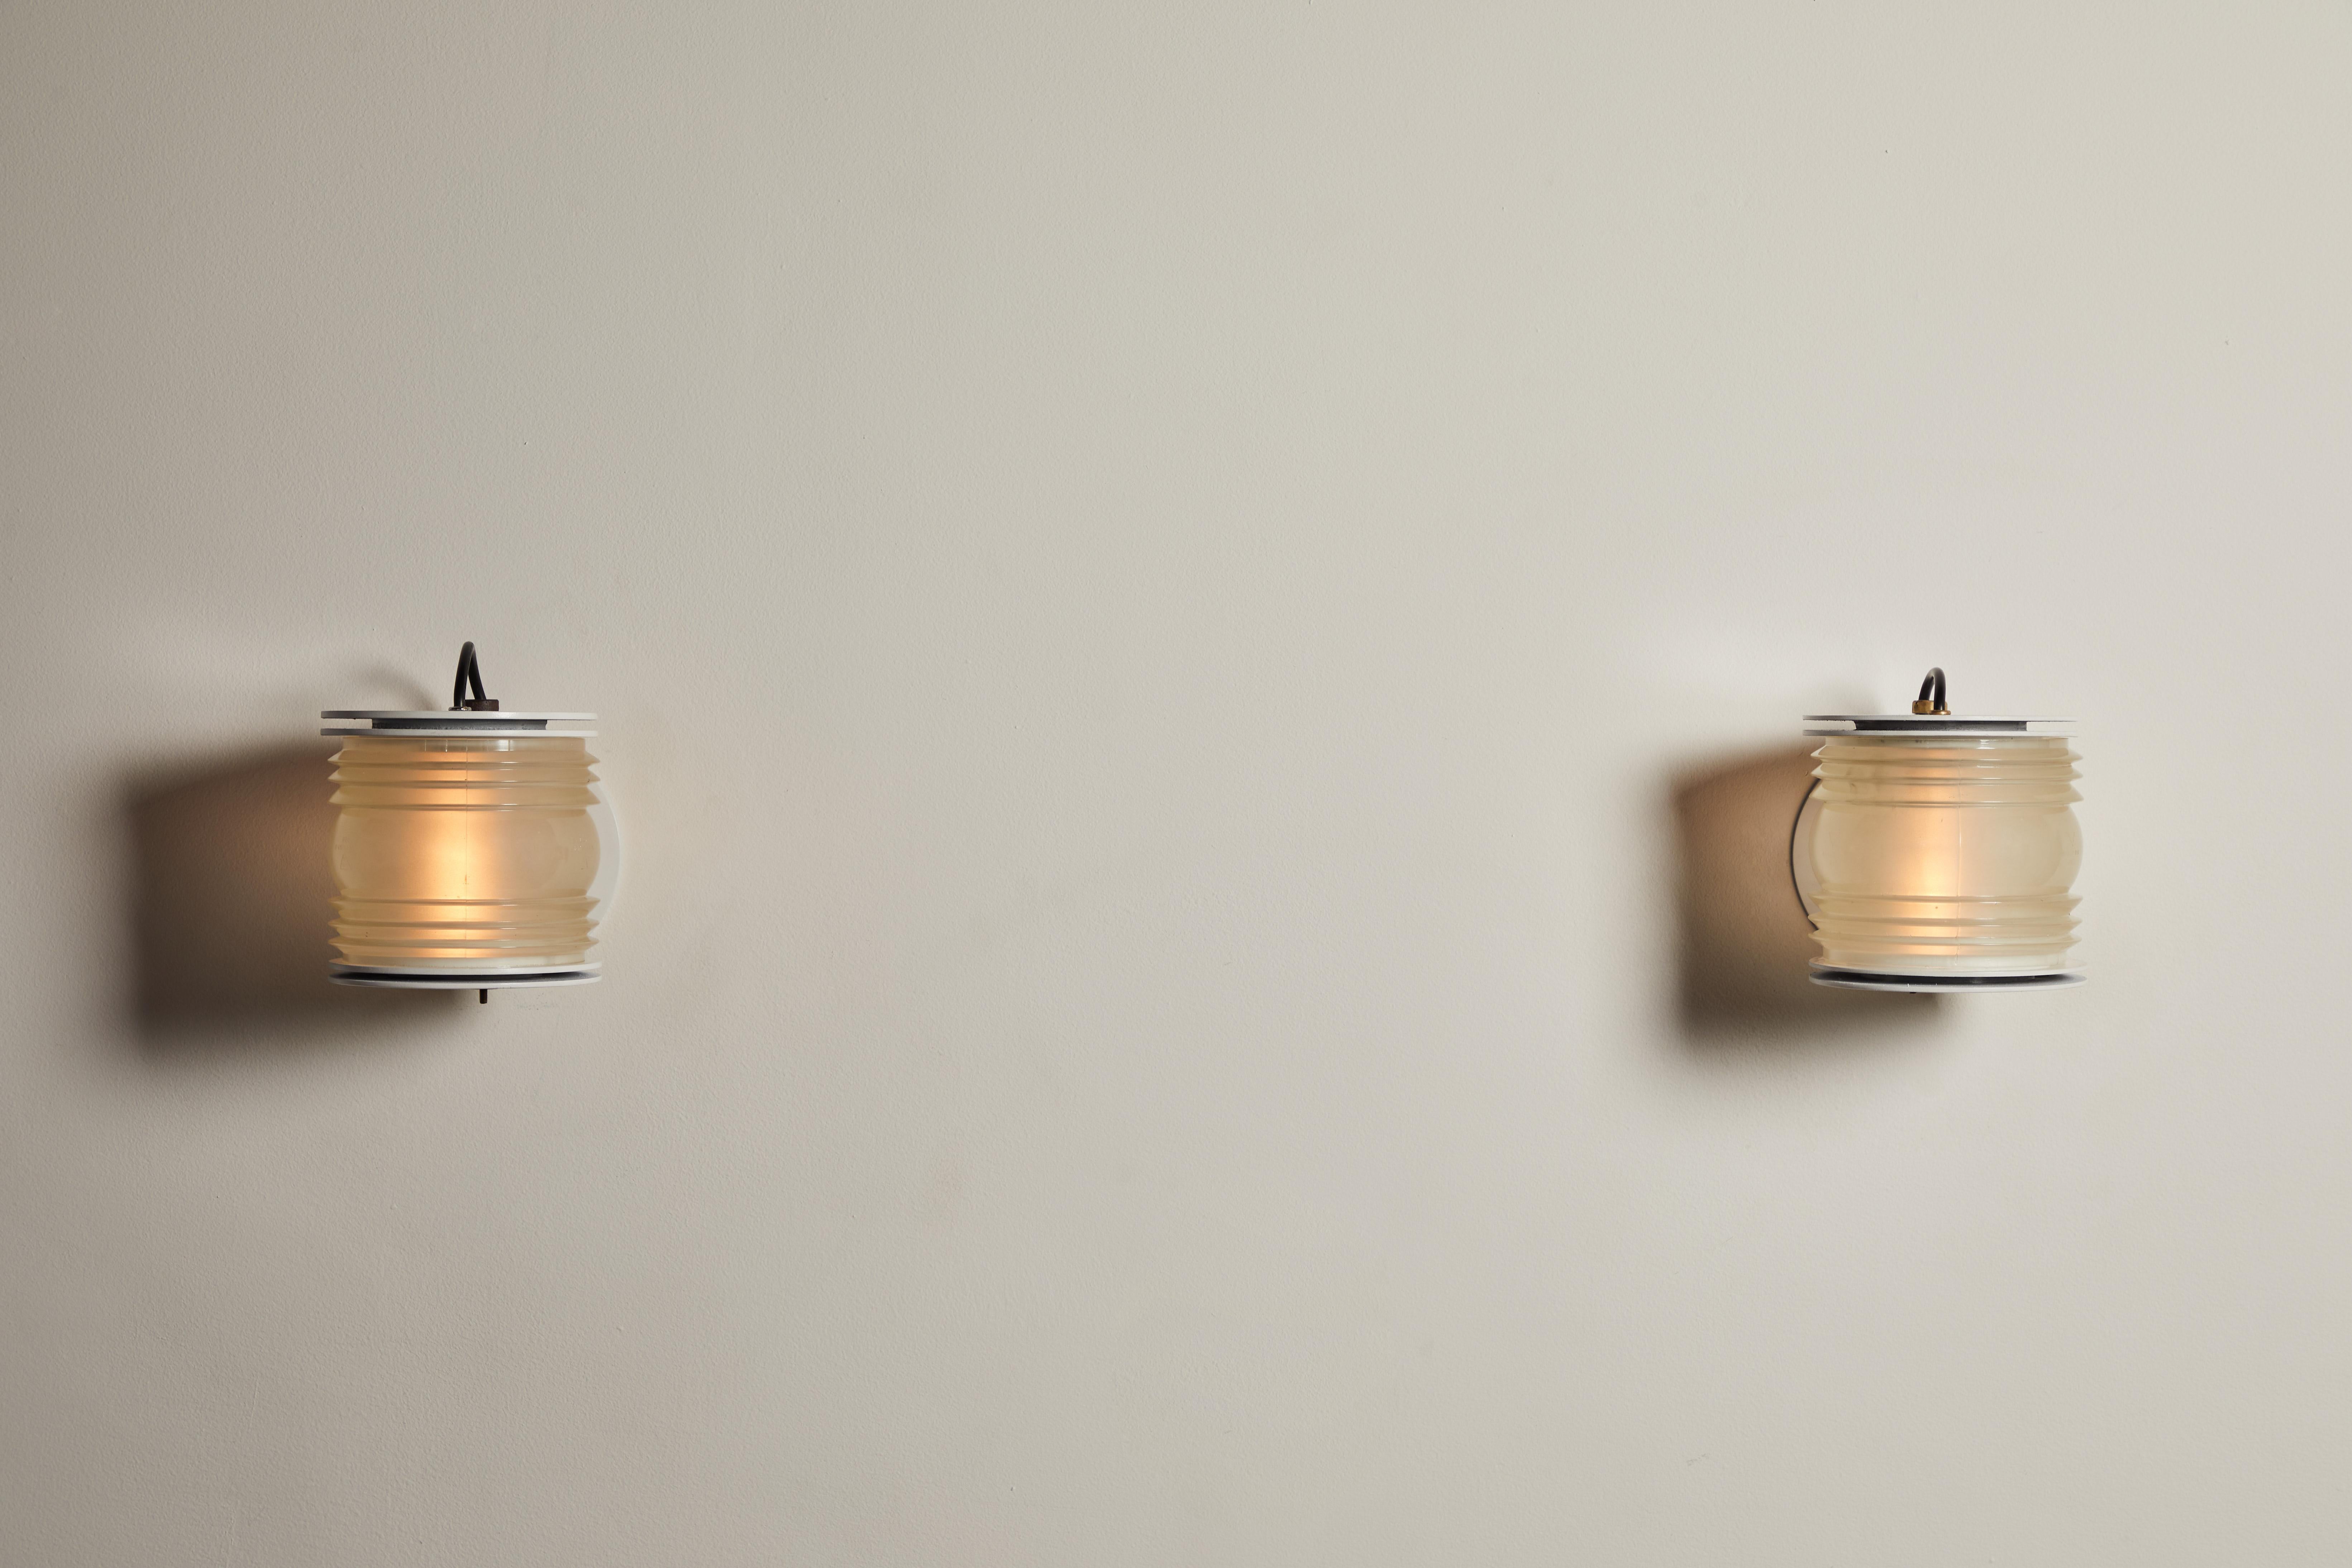 Pair of original Fresnel sconces by Joe Colombo for Oluce. Designed and manufactured in Italy, circa 1960s. Enameled metal, textured opaline glass. Rewired for U.S. junction boxes. Each light Takes one E27 100w maximum bulb. Bulbs provided as a one